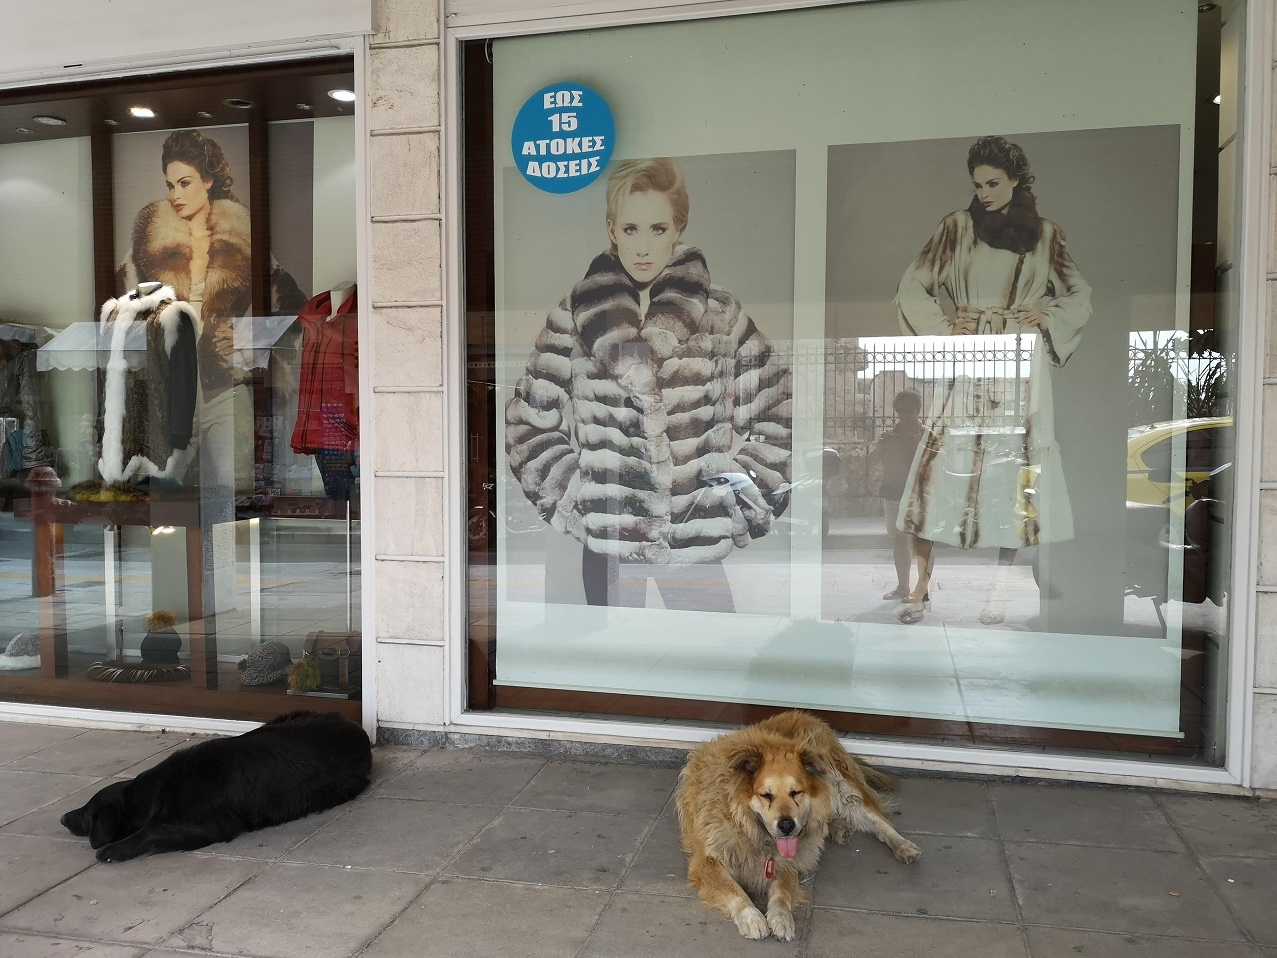 Shop dummies wearing fur jackets with dogs